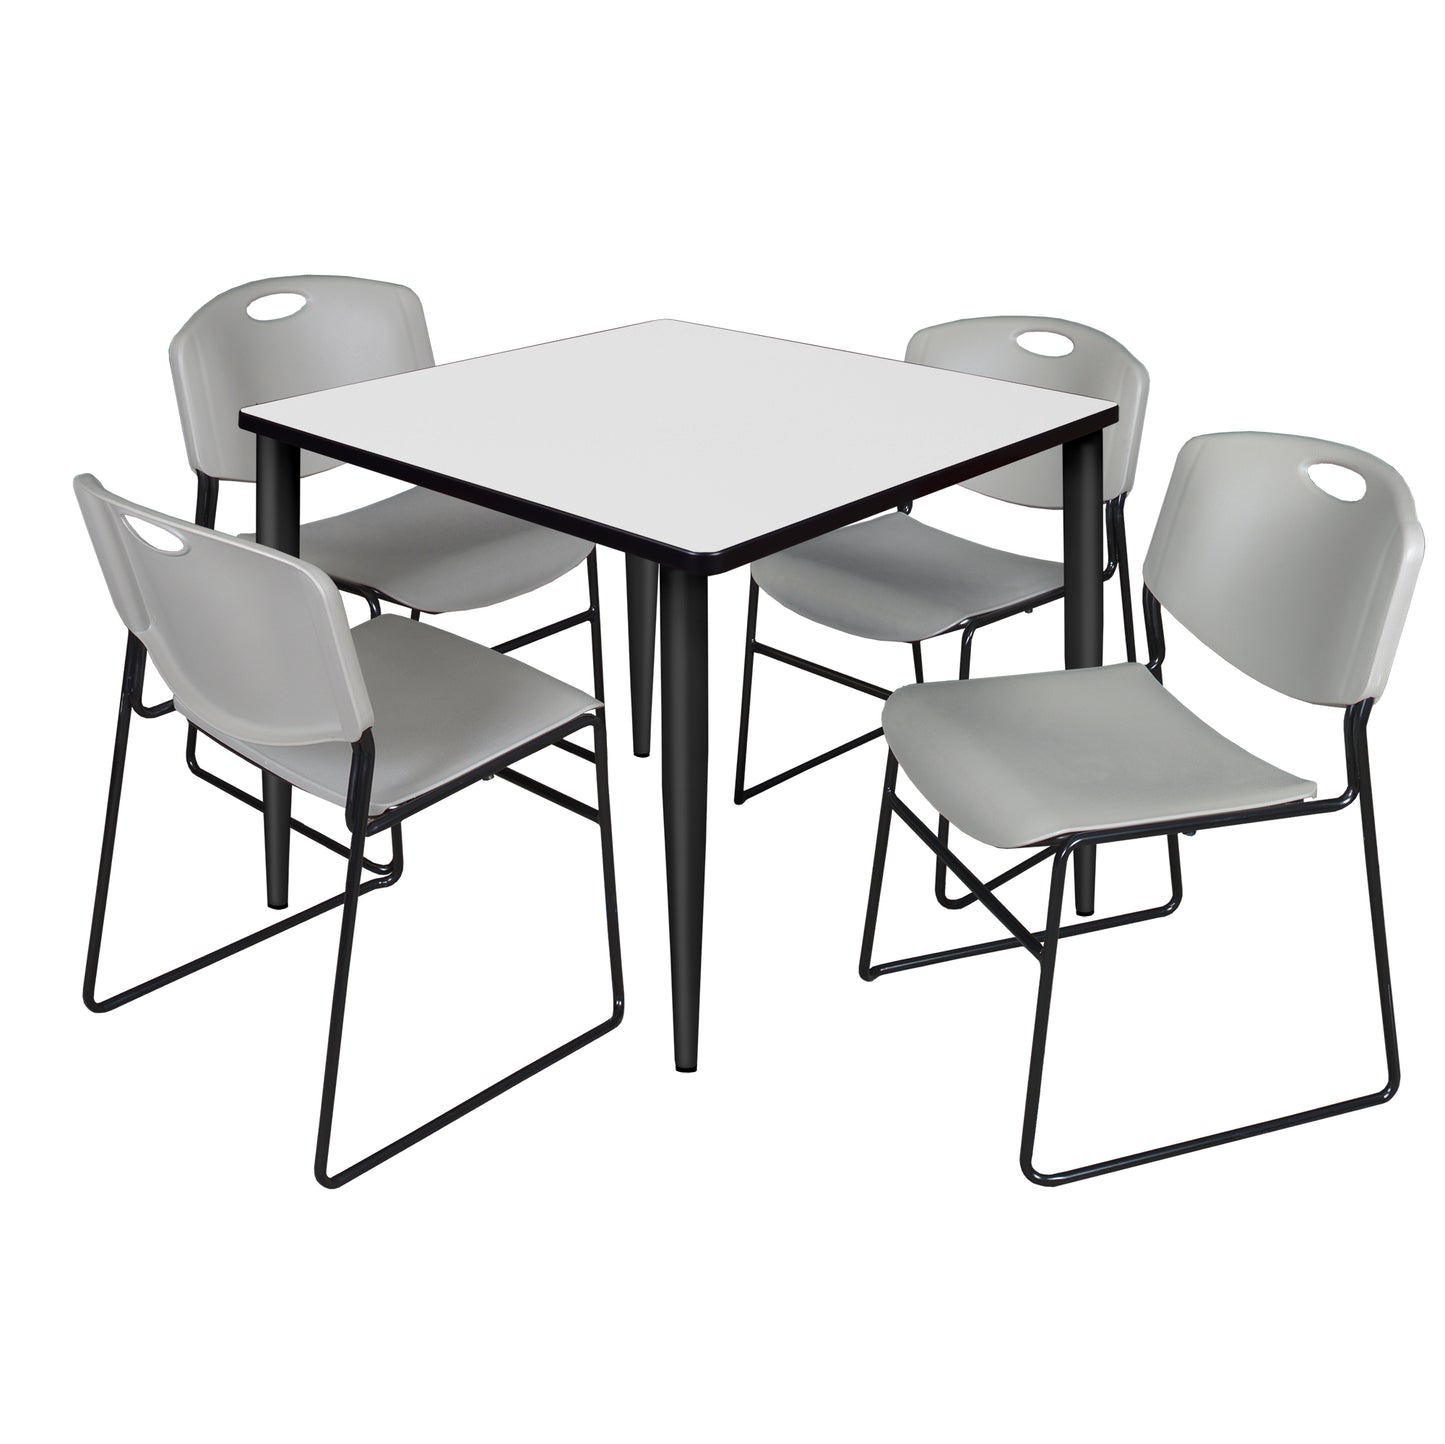 Regency Kahlo 42 in. Square Breakroom Table & 4 Zeng Stack Chairs